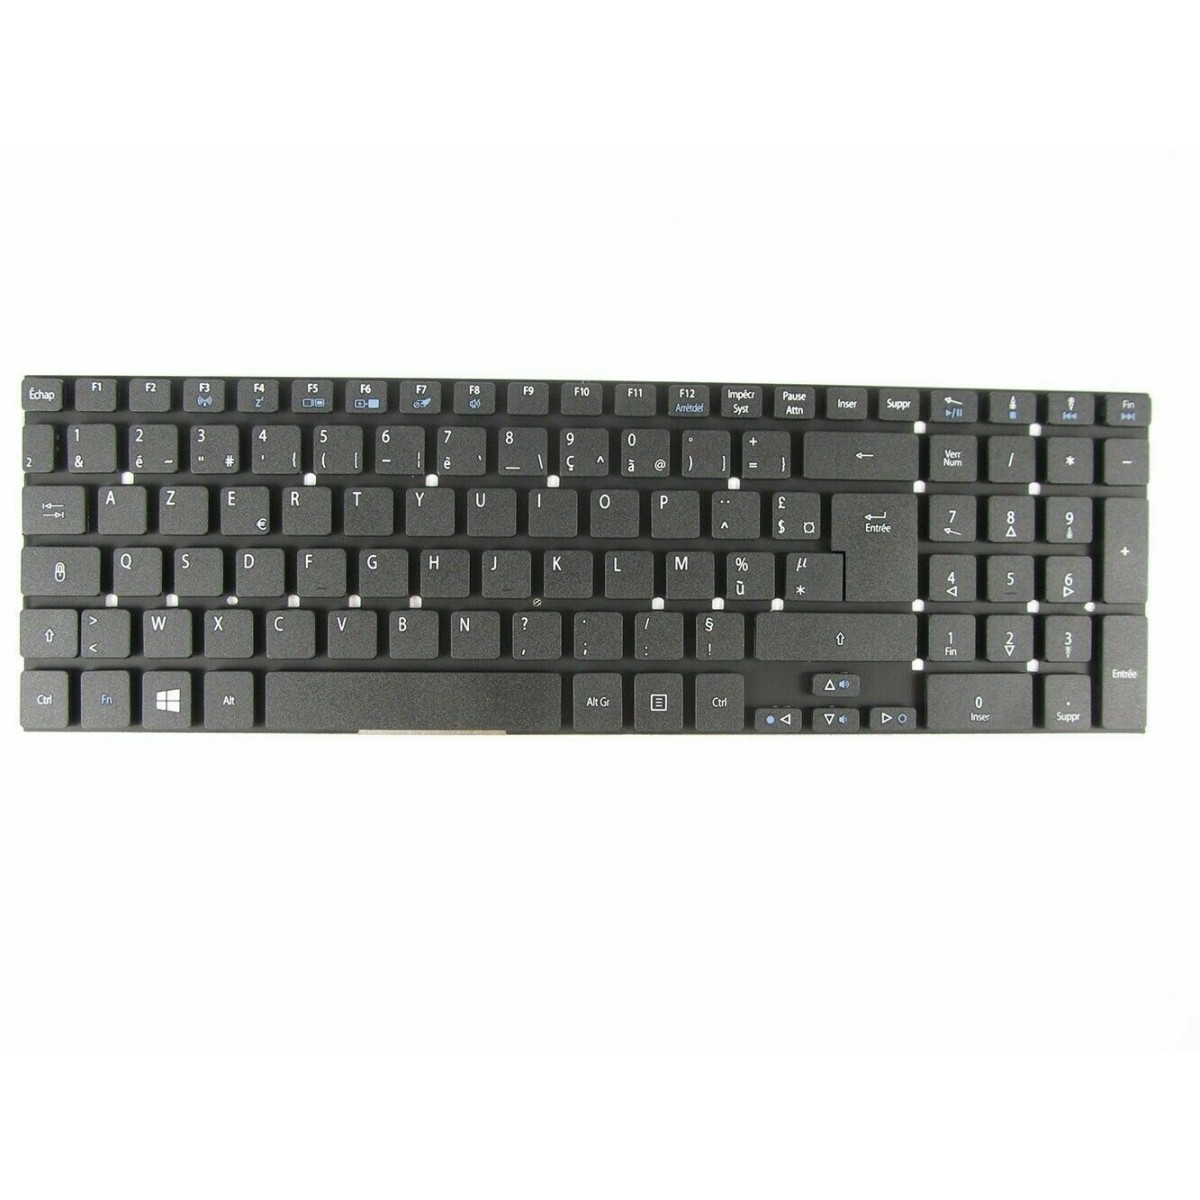 Clavier Azerty Français pour Packard Bell EasyNote TS11 SERIES MP10K36F0698